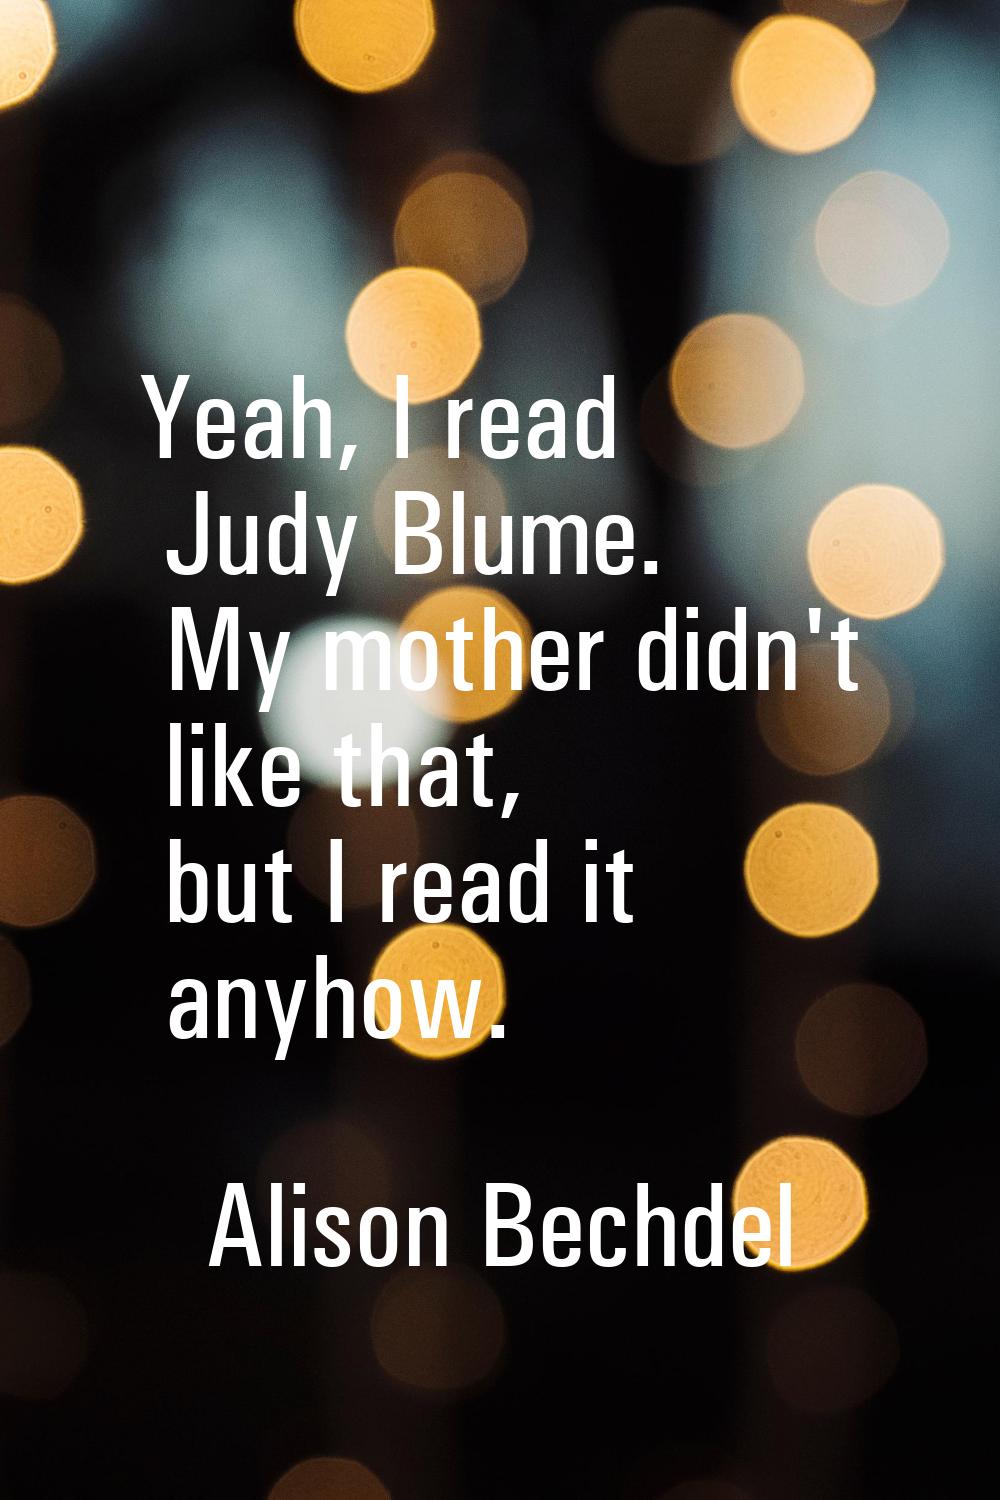 Yeah, I read Judy Blume. My mother didn't like that, but I read it anyhow.